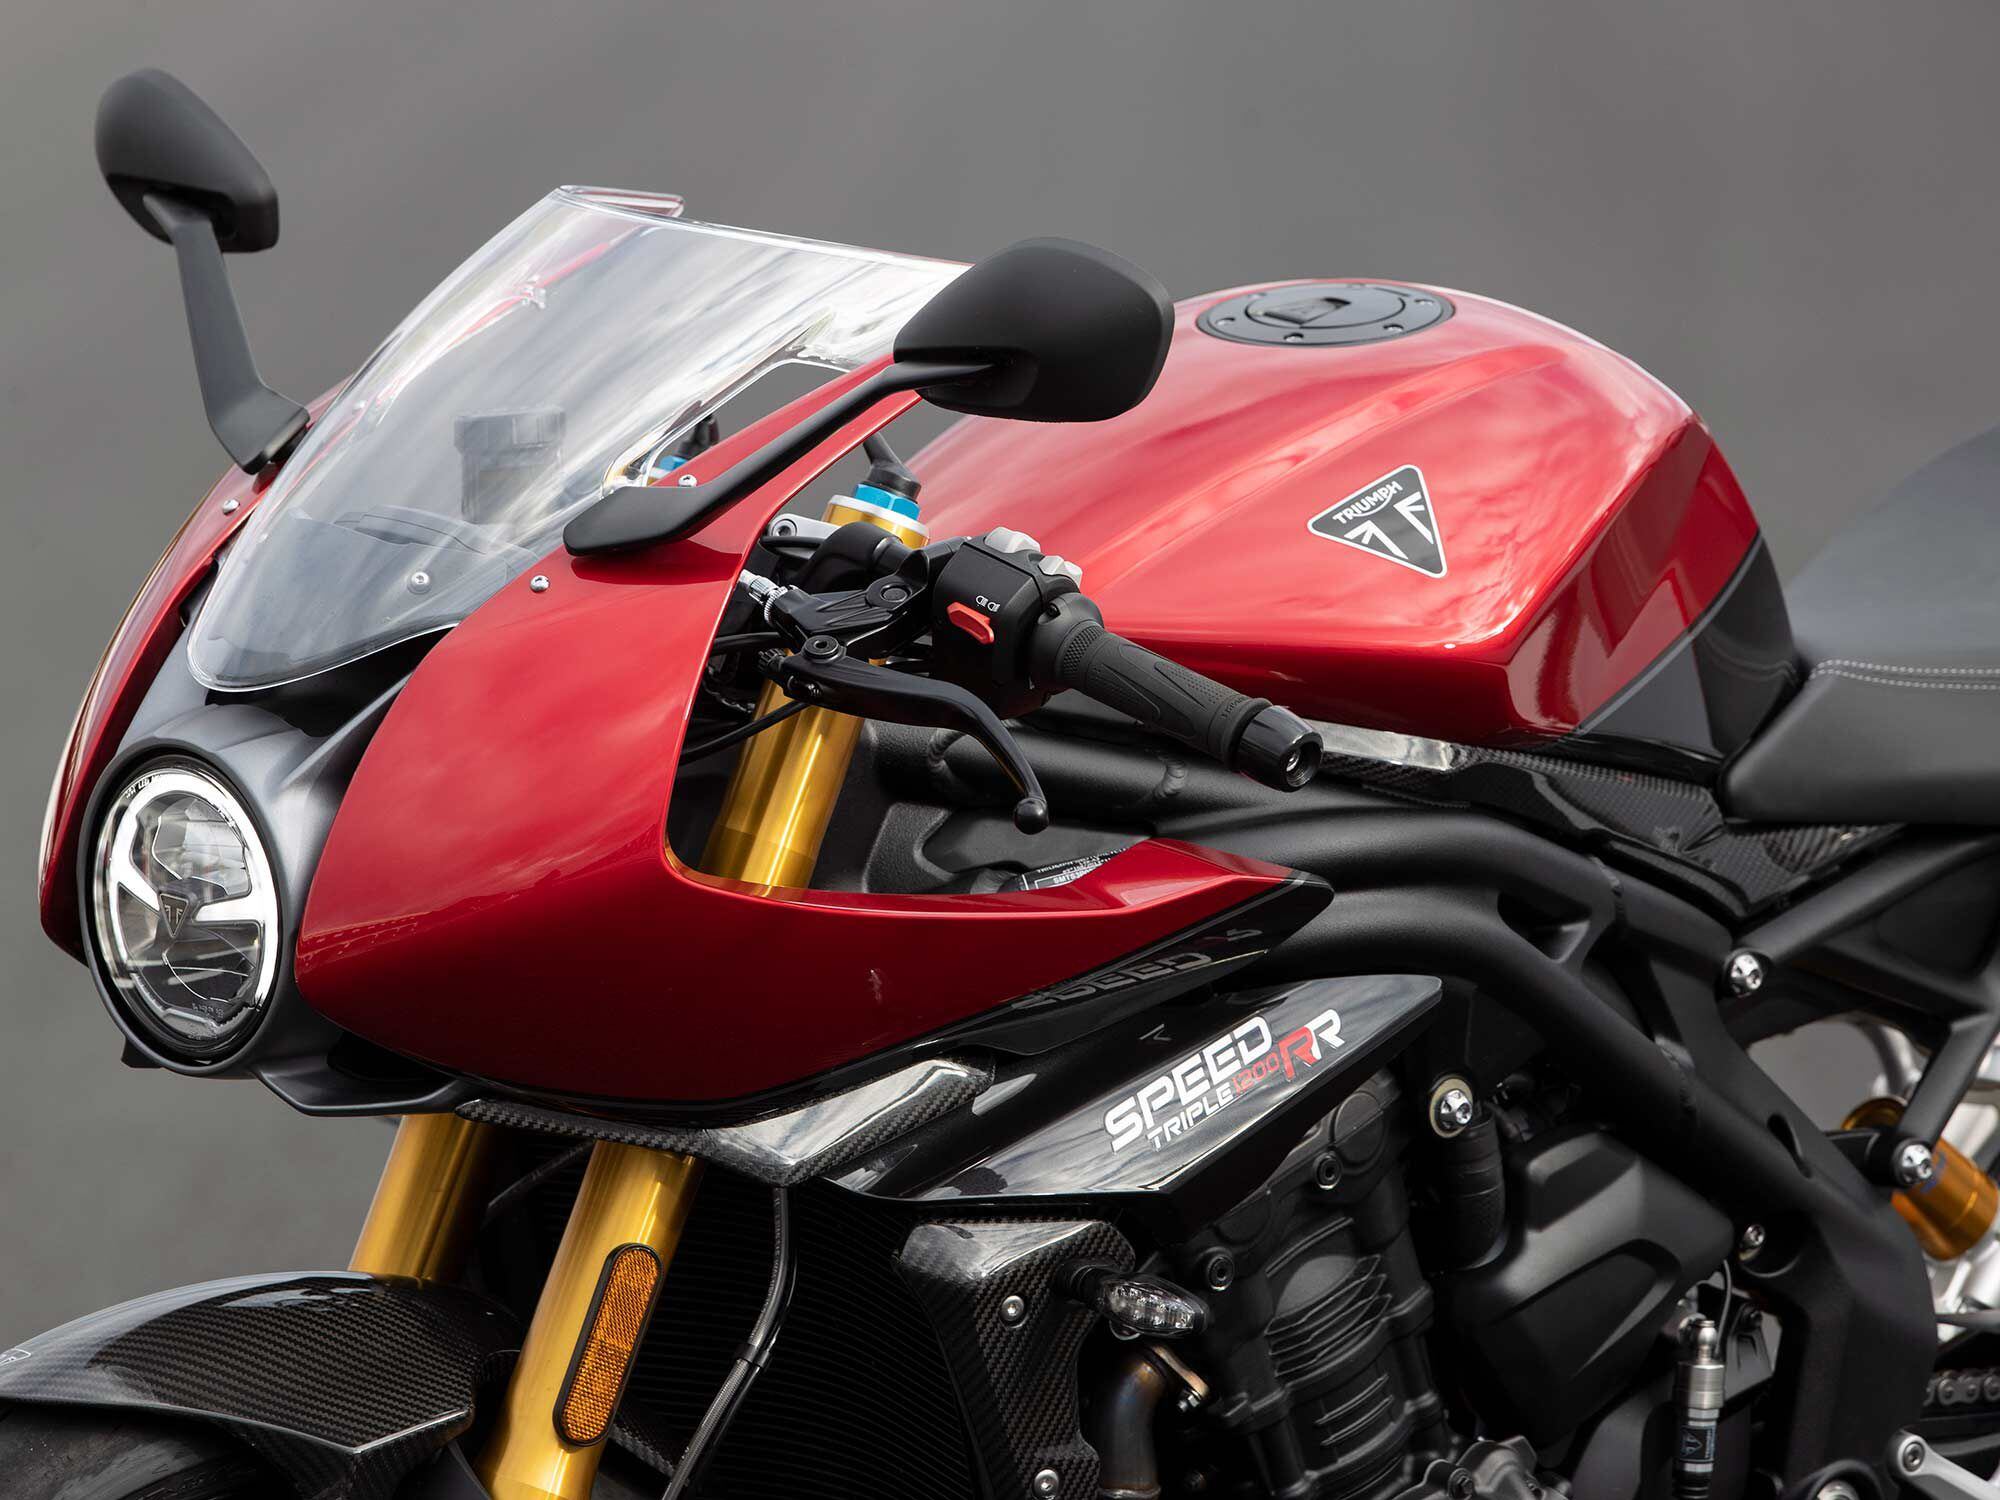 Clip-on handlebars tucked behind a bikini fairing add sporting character to the Speed Triple 1200 RR over the RS.